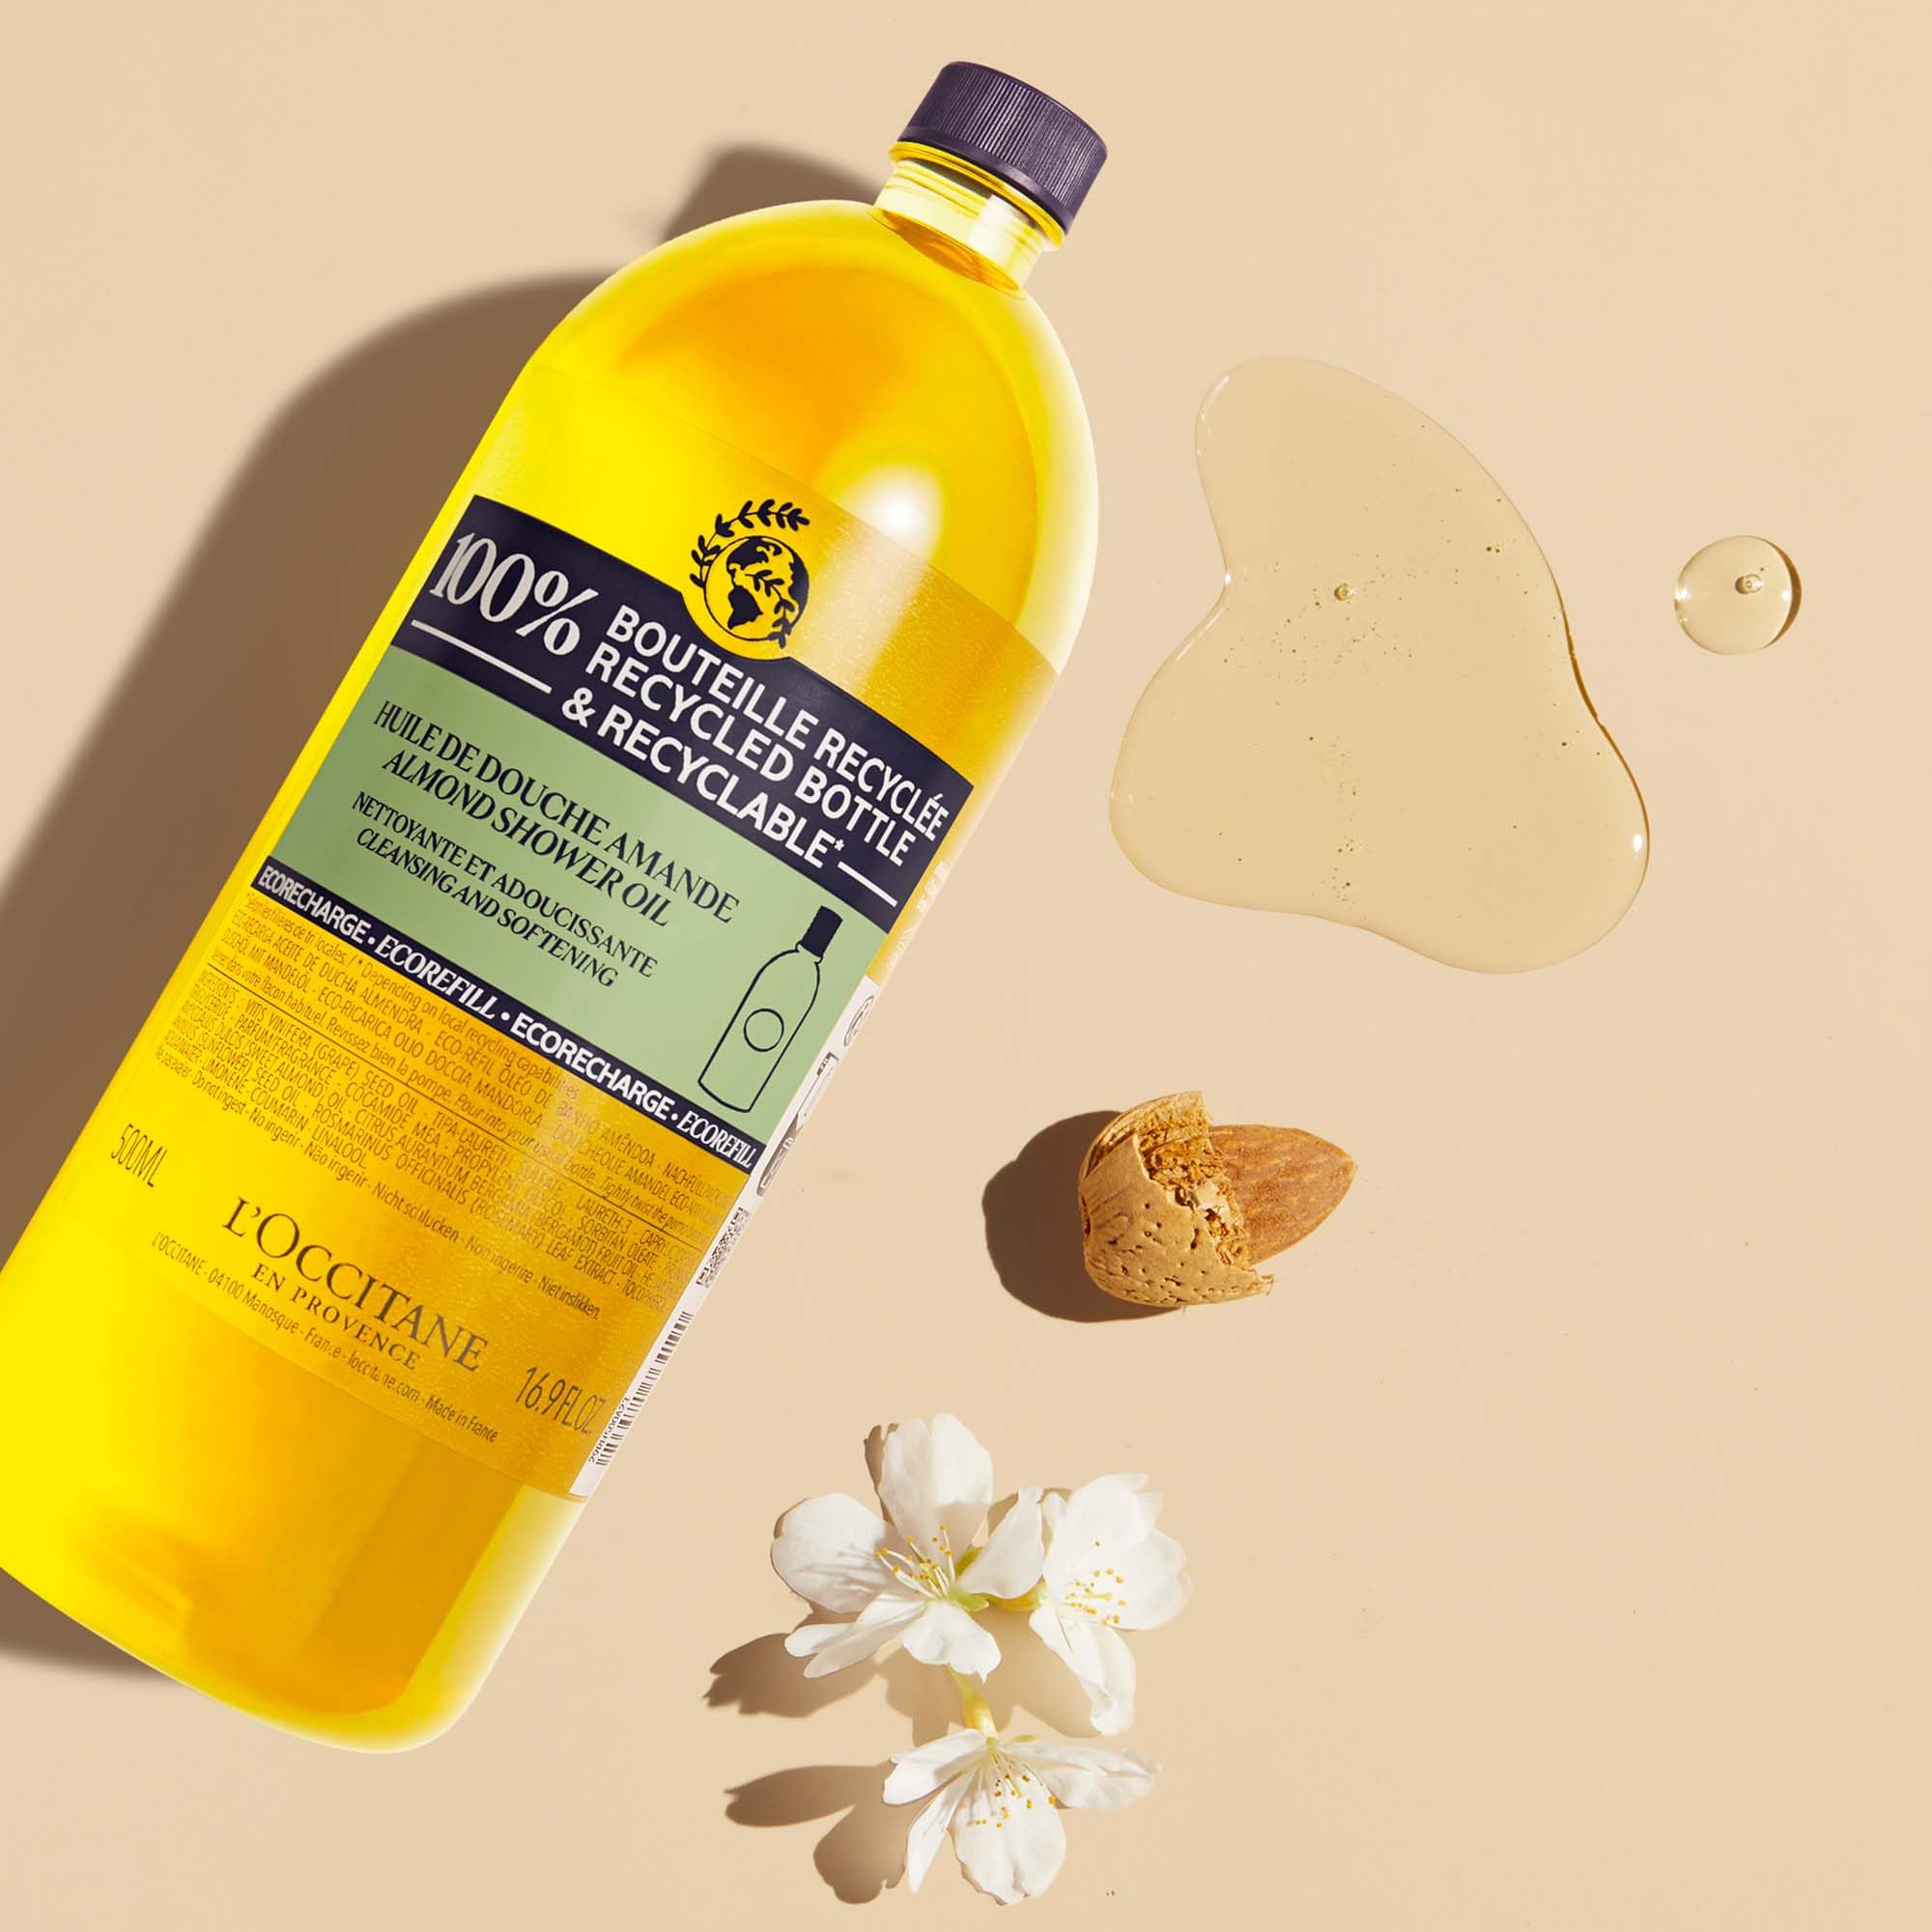 L'Occitane Cleansing & Softening Almond Shower Oil, Oil-to-Milky Lather, Softer Skin, Smooth Skin, Cleanse Without Drying, With Almond Oil